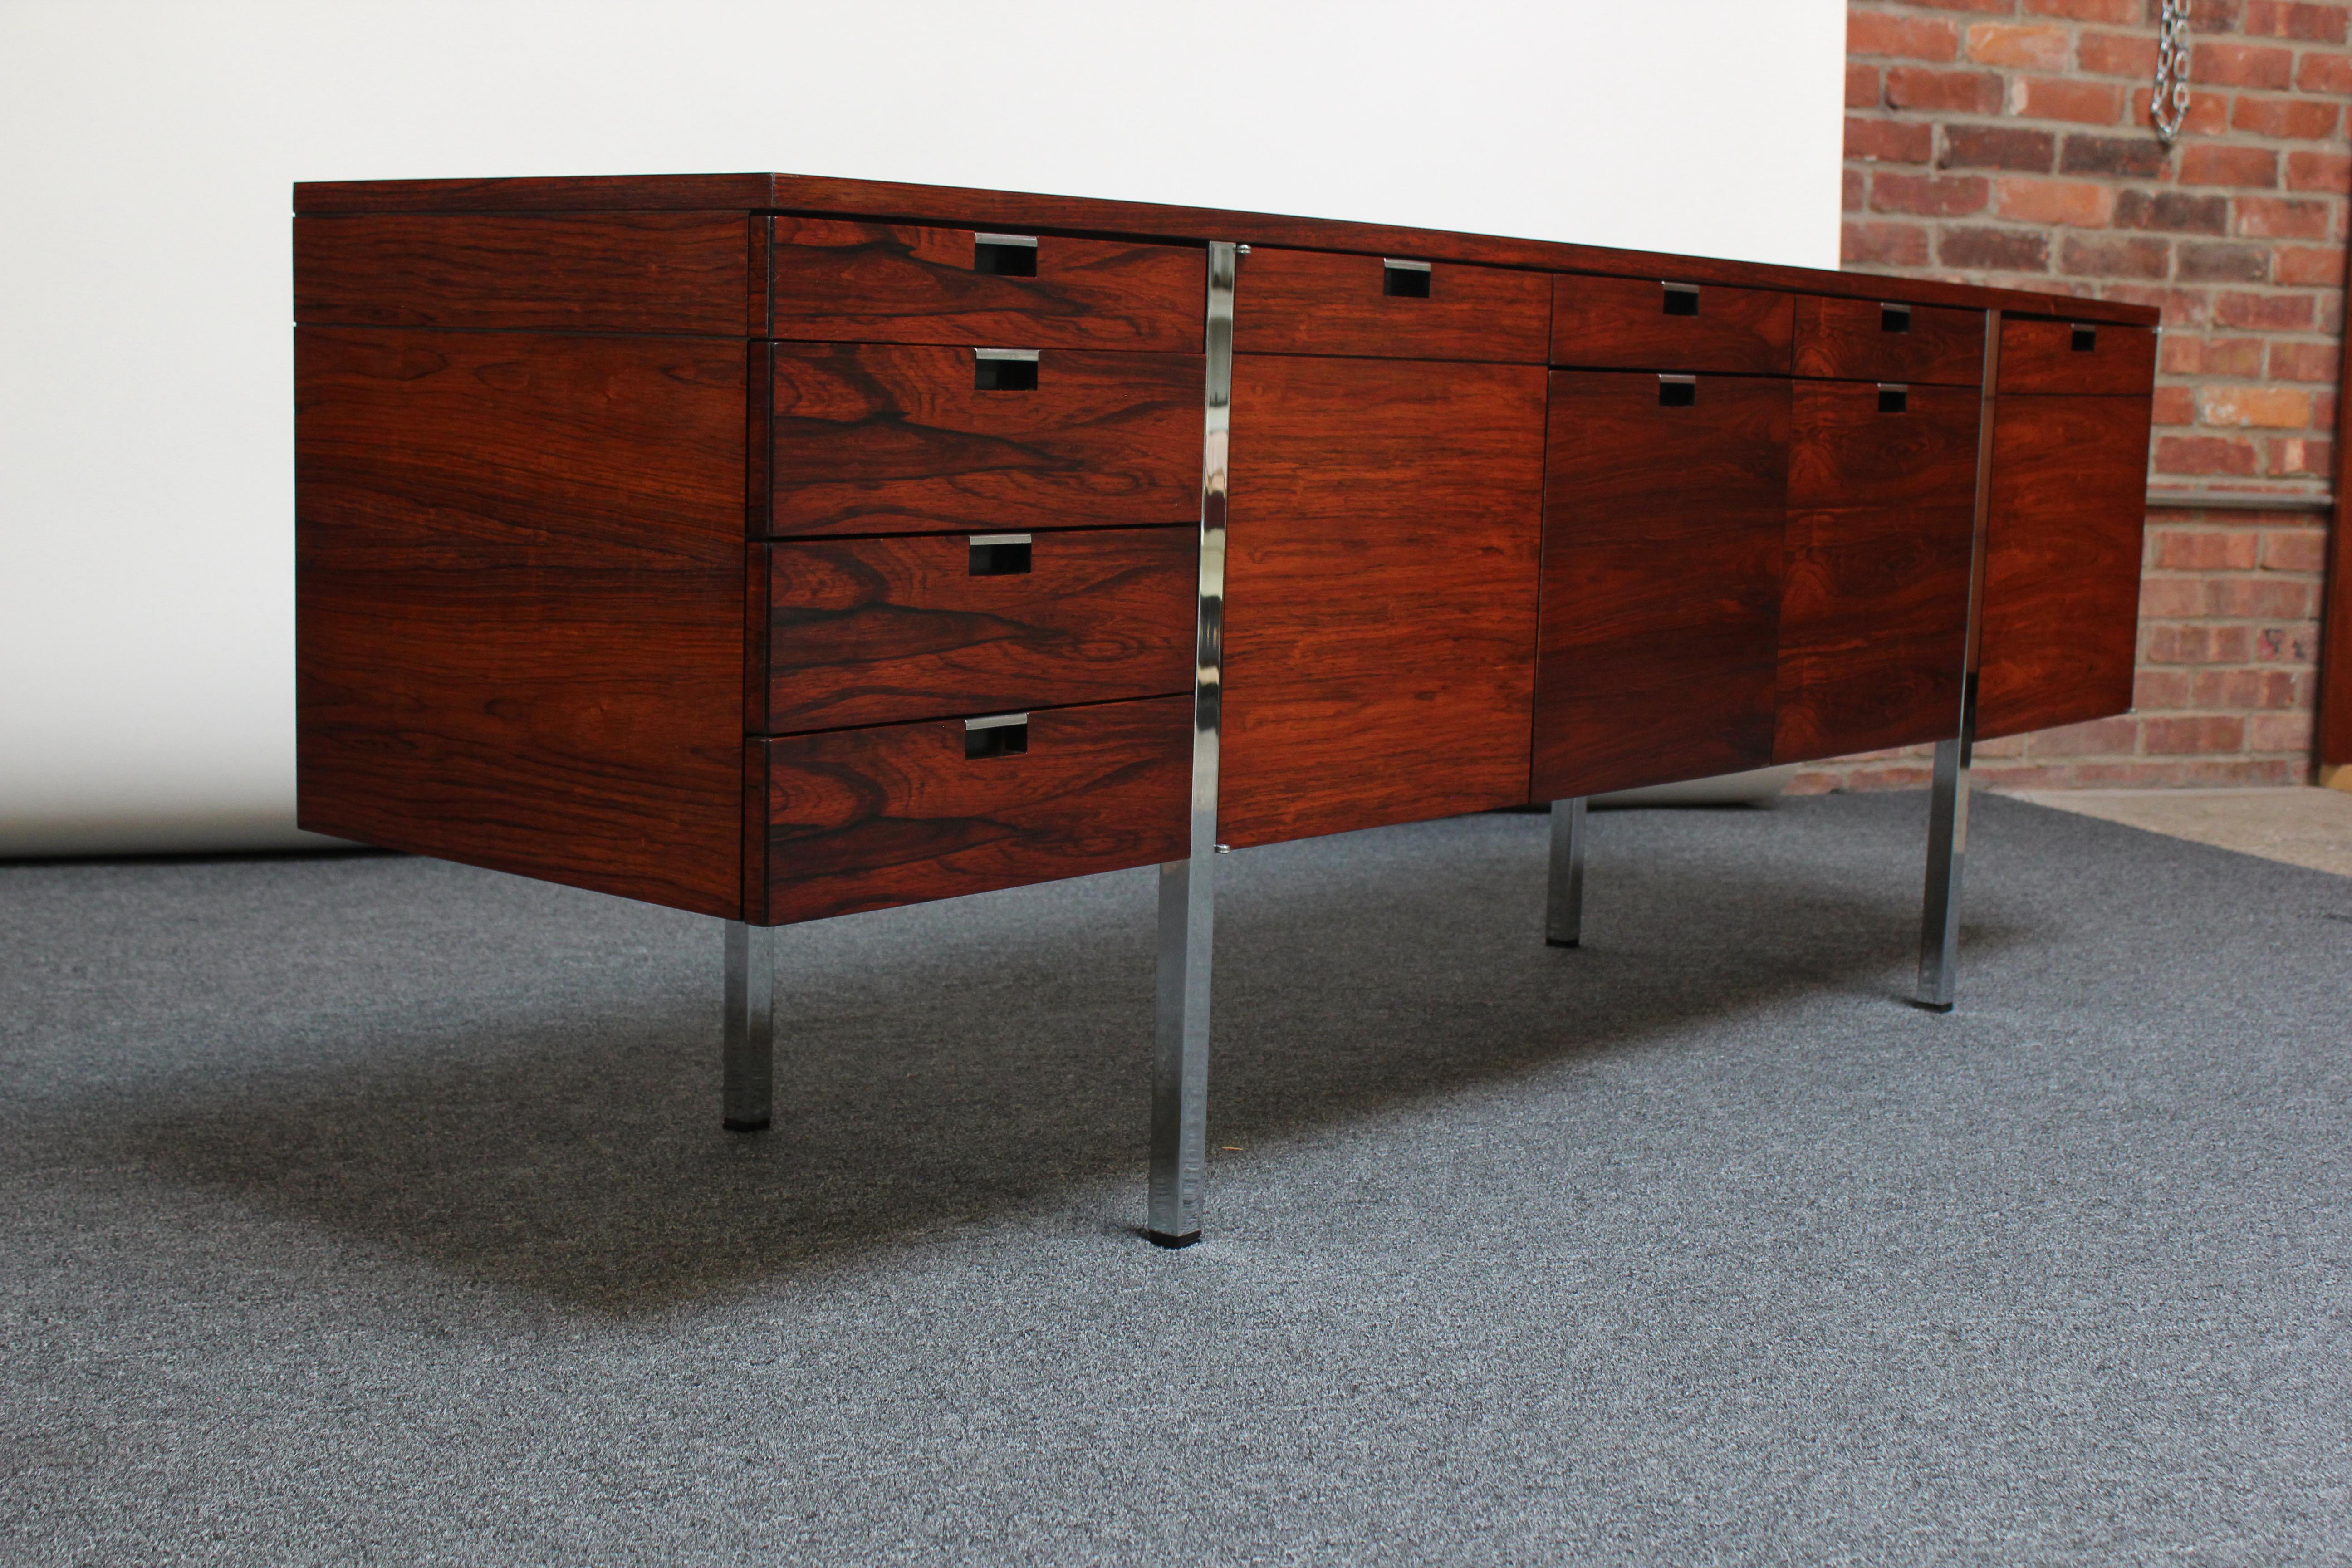 Handsome credenza designed in the 1970s by Roger Sprunger for Dunbar composed of exquisite rosewood veneer and chrome inset pulls and legs. 
Ample storage in a variety of configurations: far left side features one shallow drawer atop three more